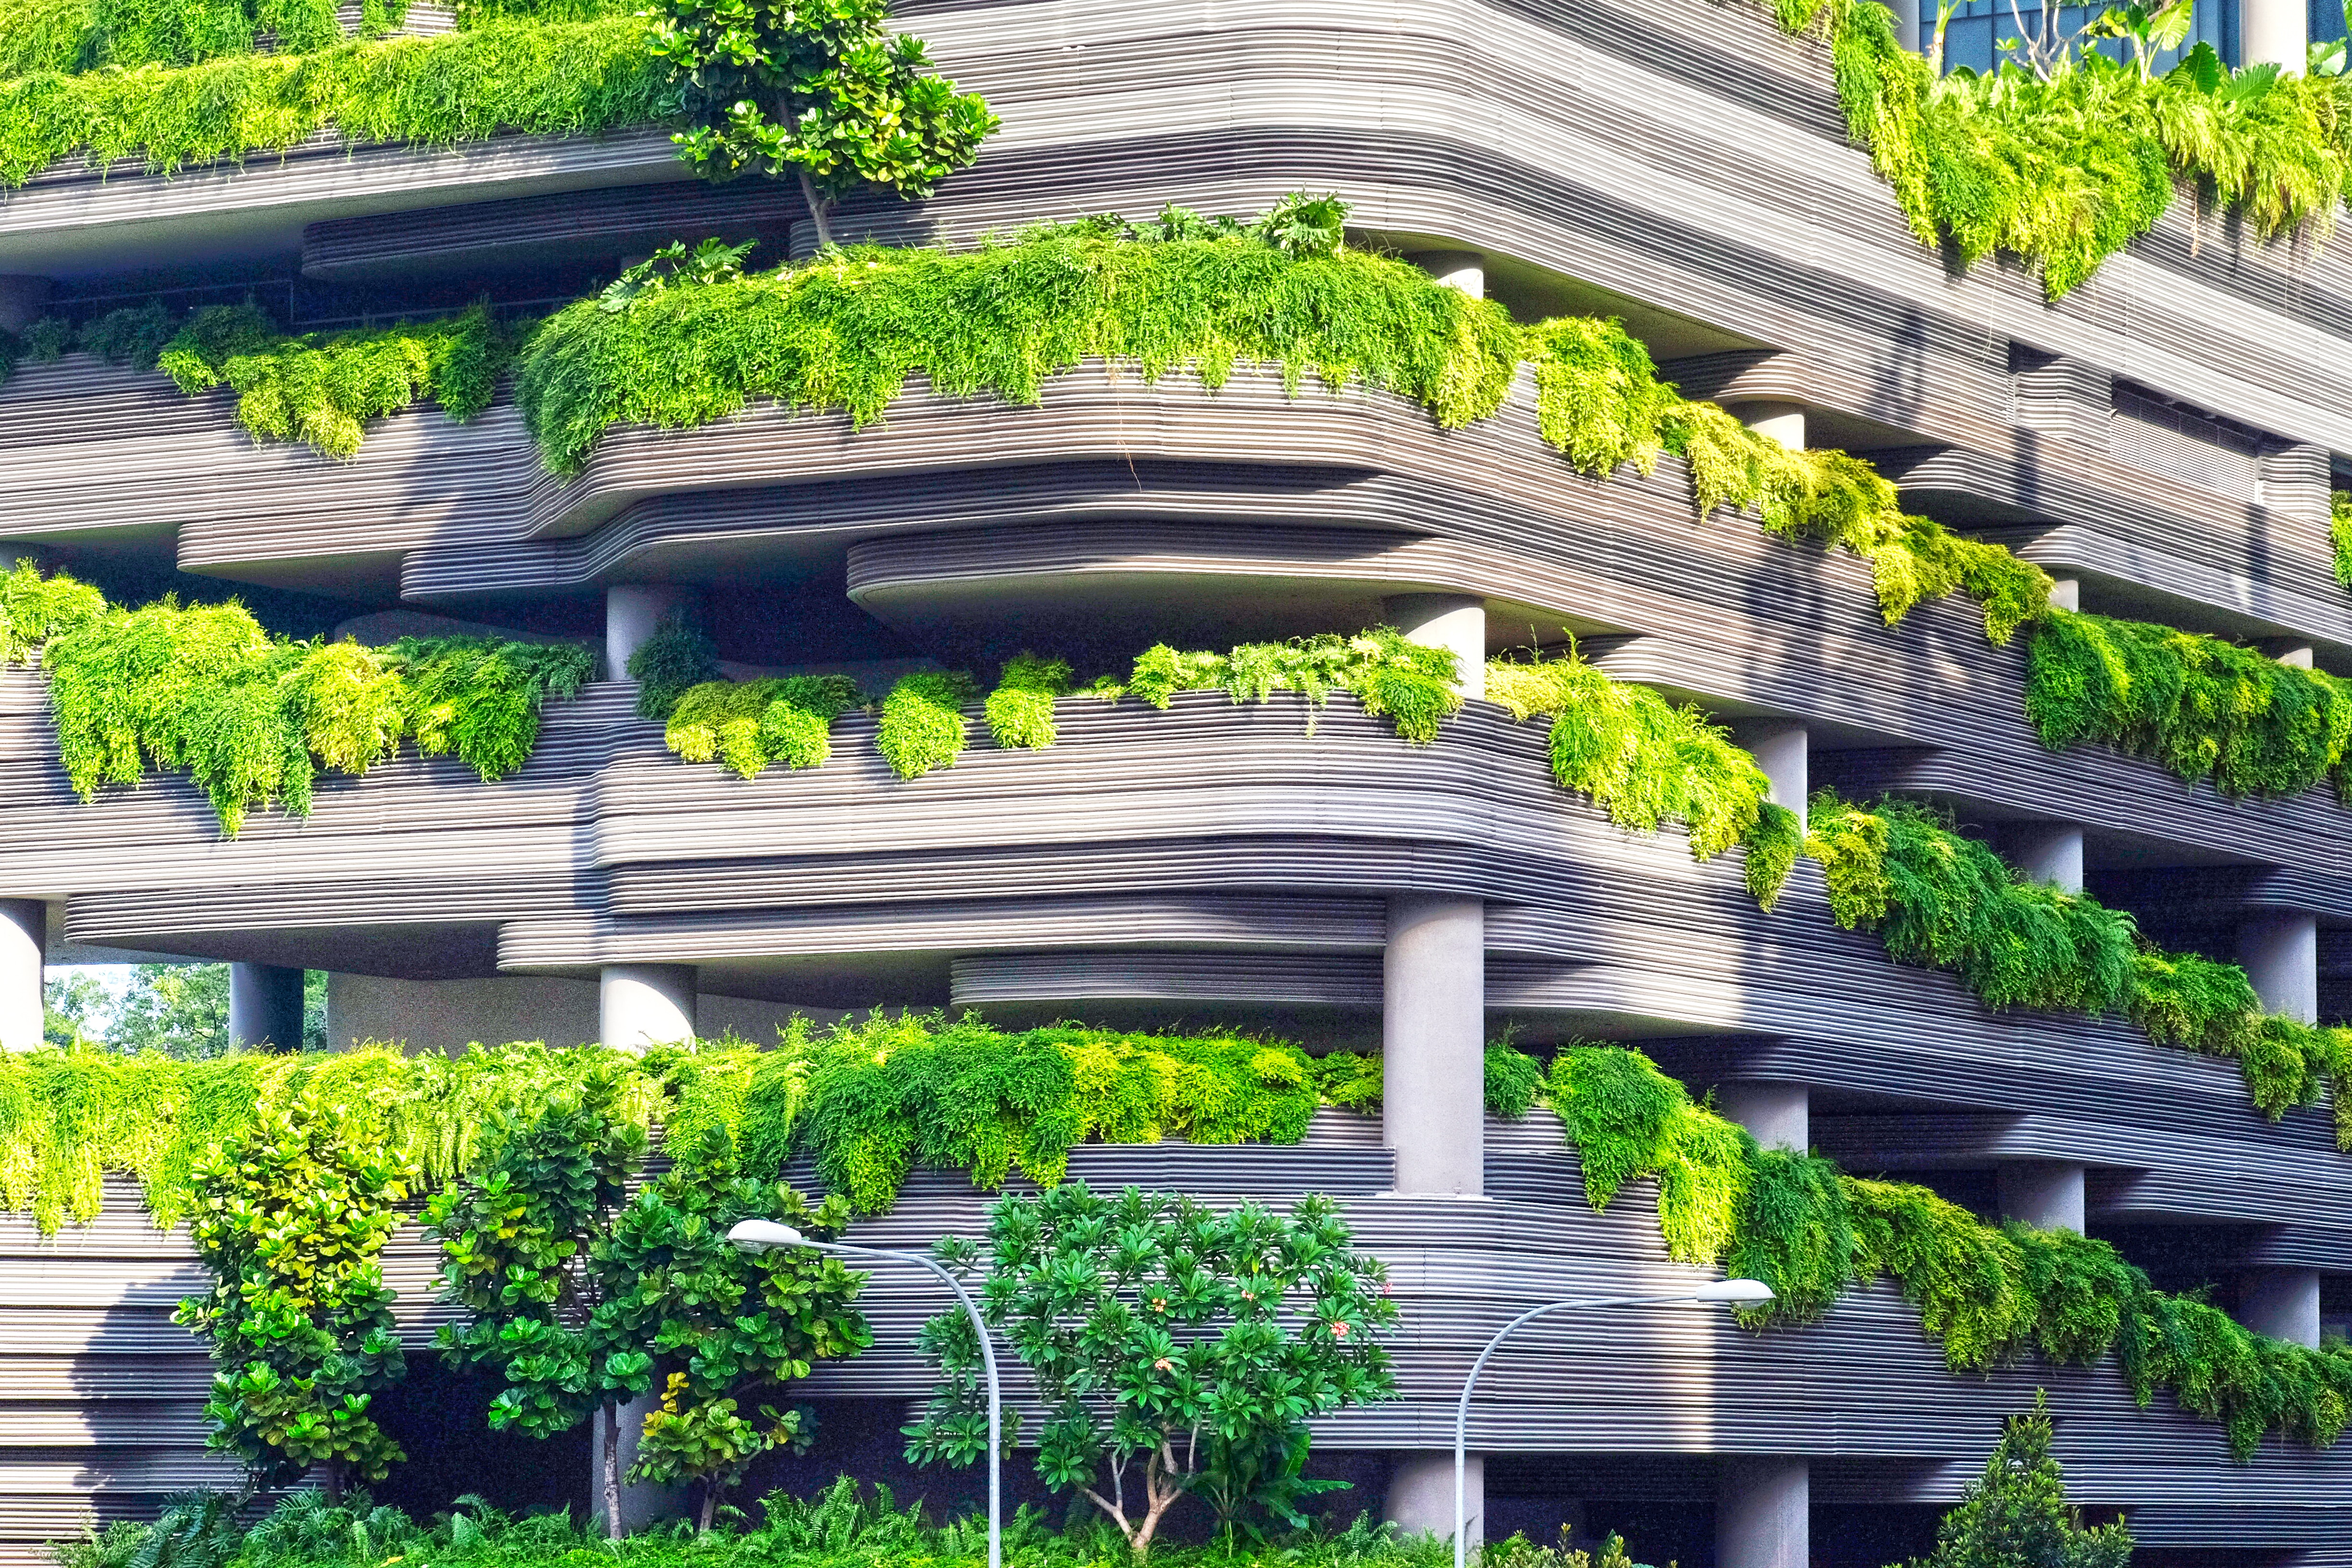 modern parking garage structure overflowing with greenery